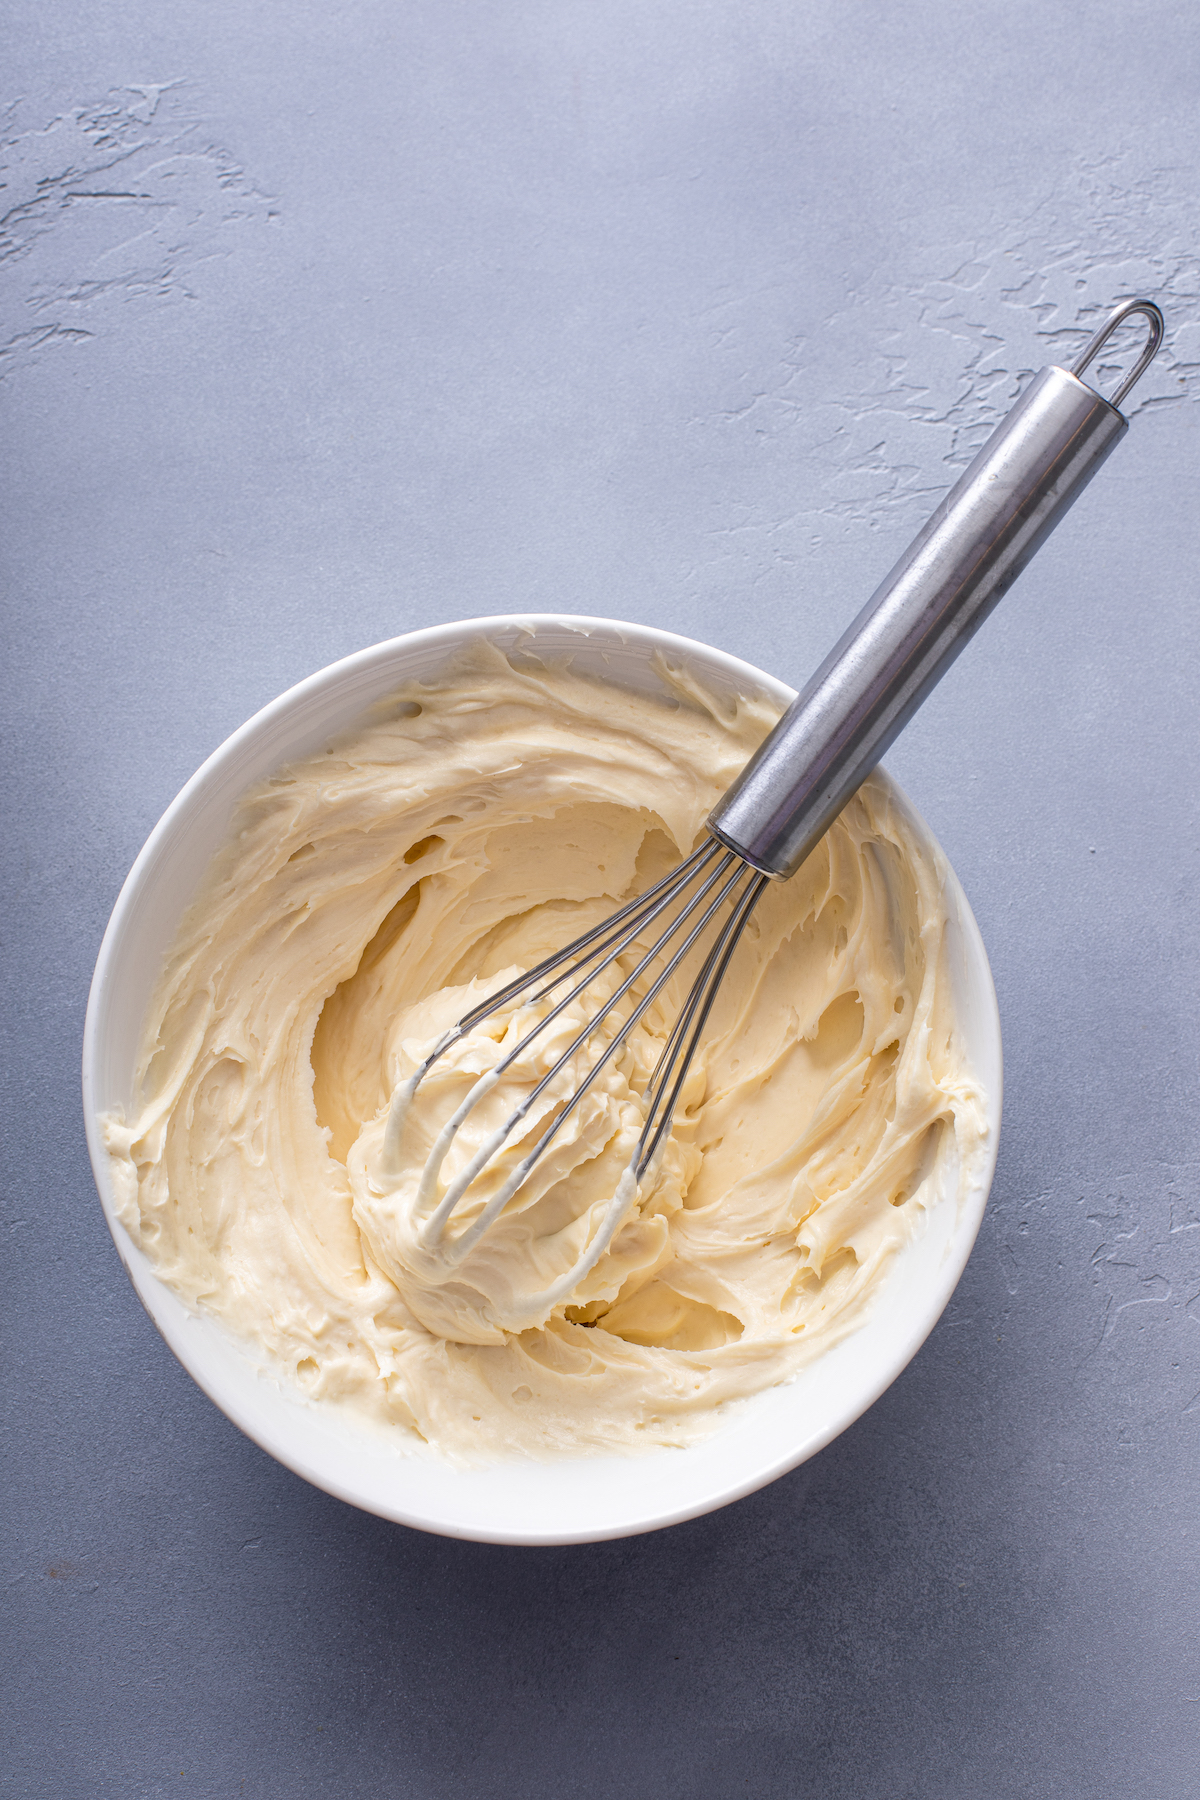 Cream cheese filling in a bowl with a whisk.